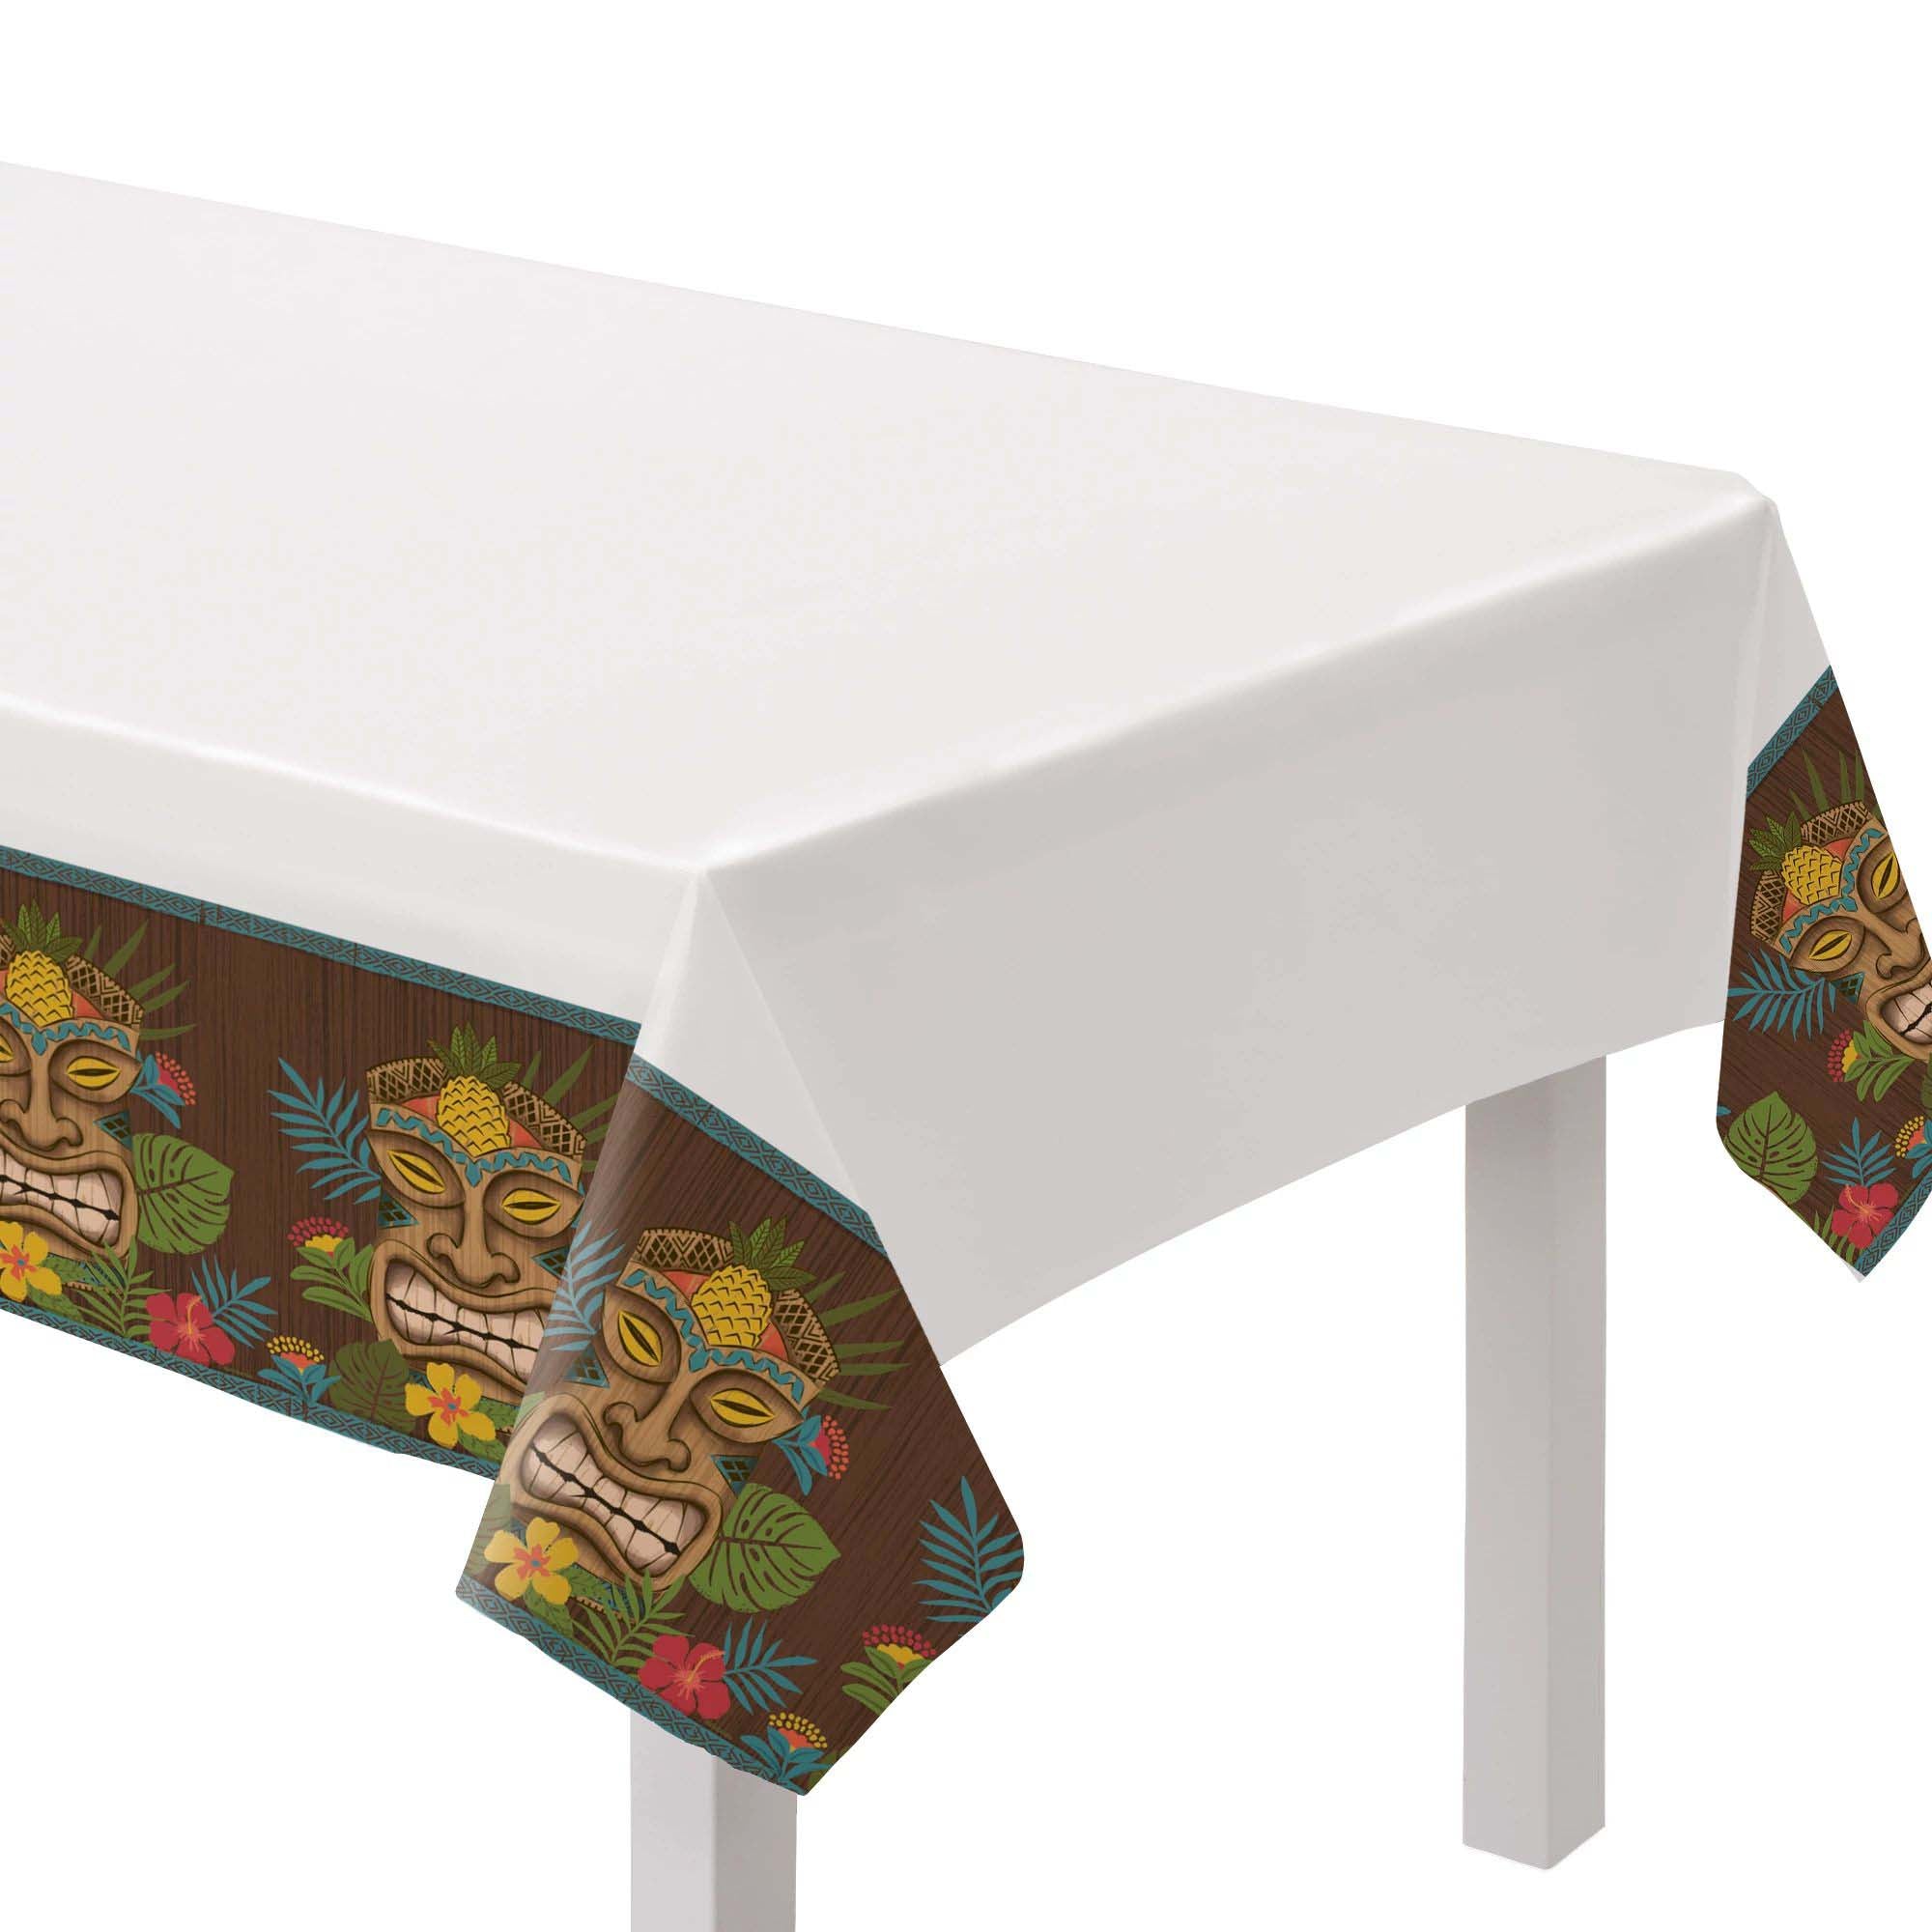 Vintage Tiki Rectangular Plastic Table Cover, 54 x 84 Inches, 3 Count